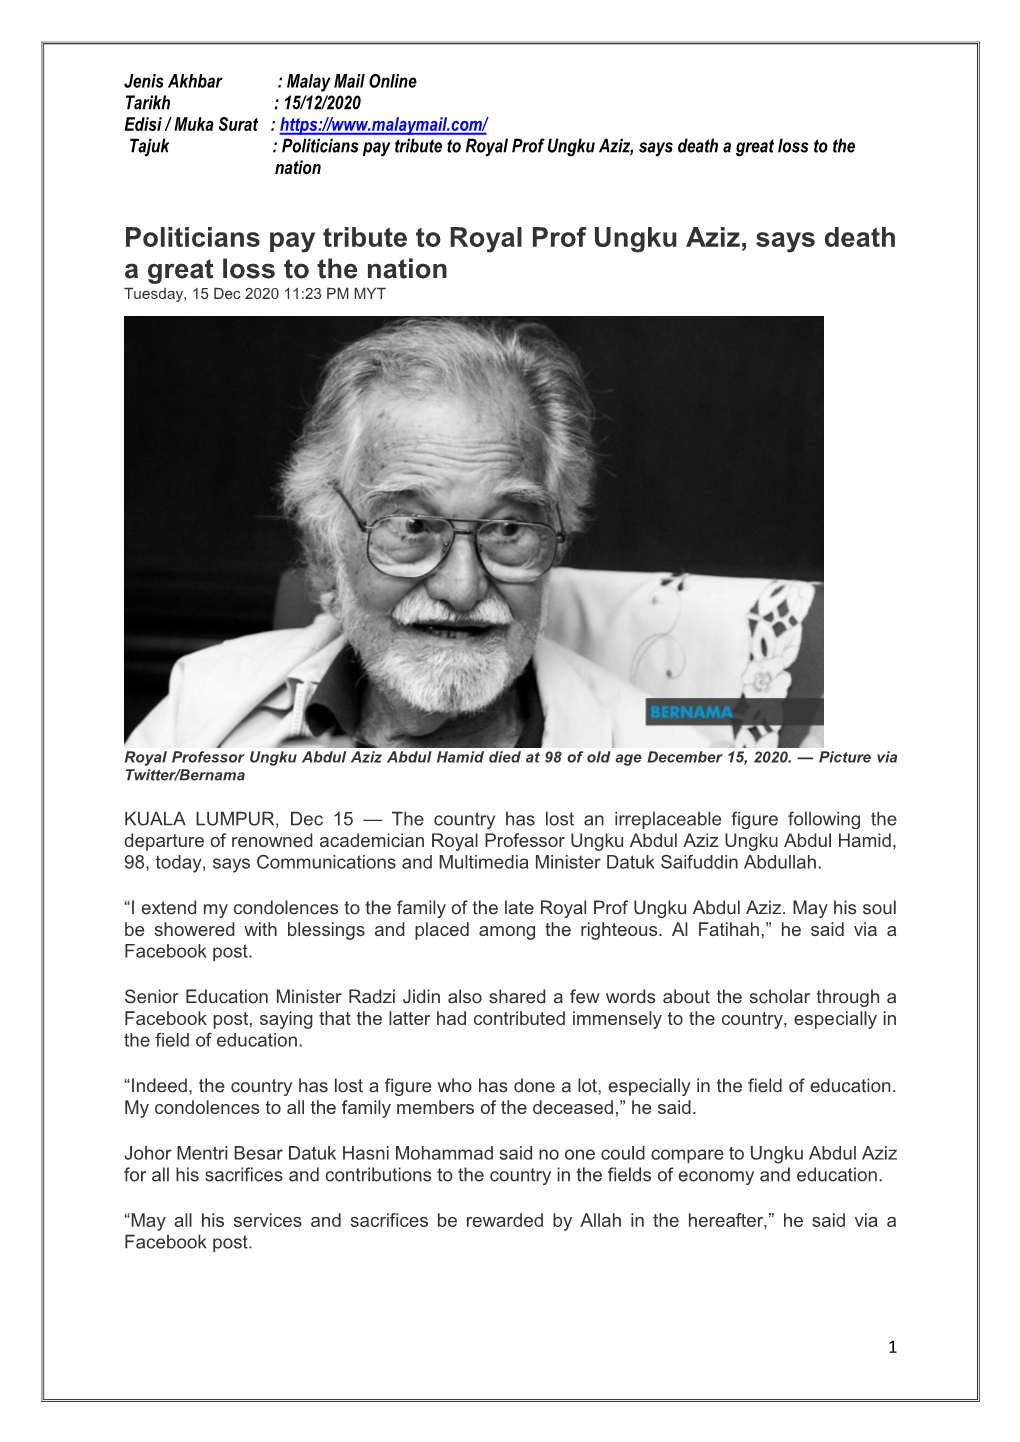 Politicians Pay Tribute to Royal Prof Ungku Aziz, Says Death a Great Loss to the Nation